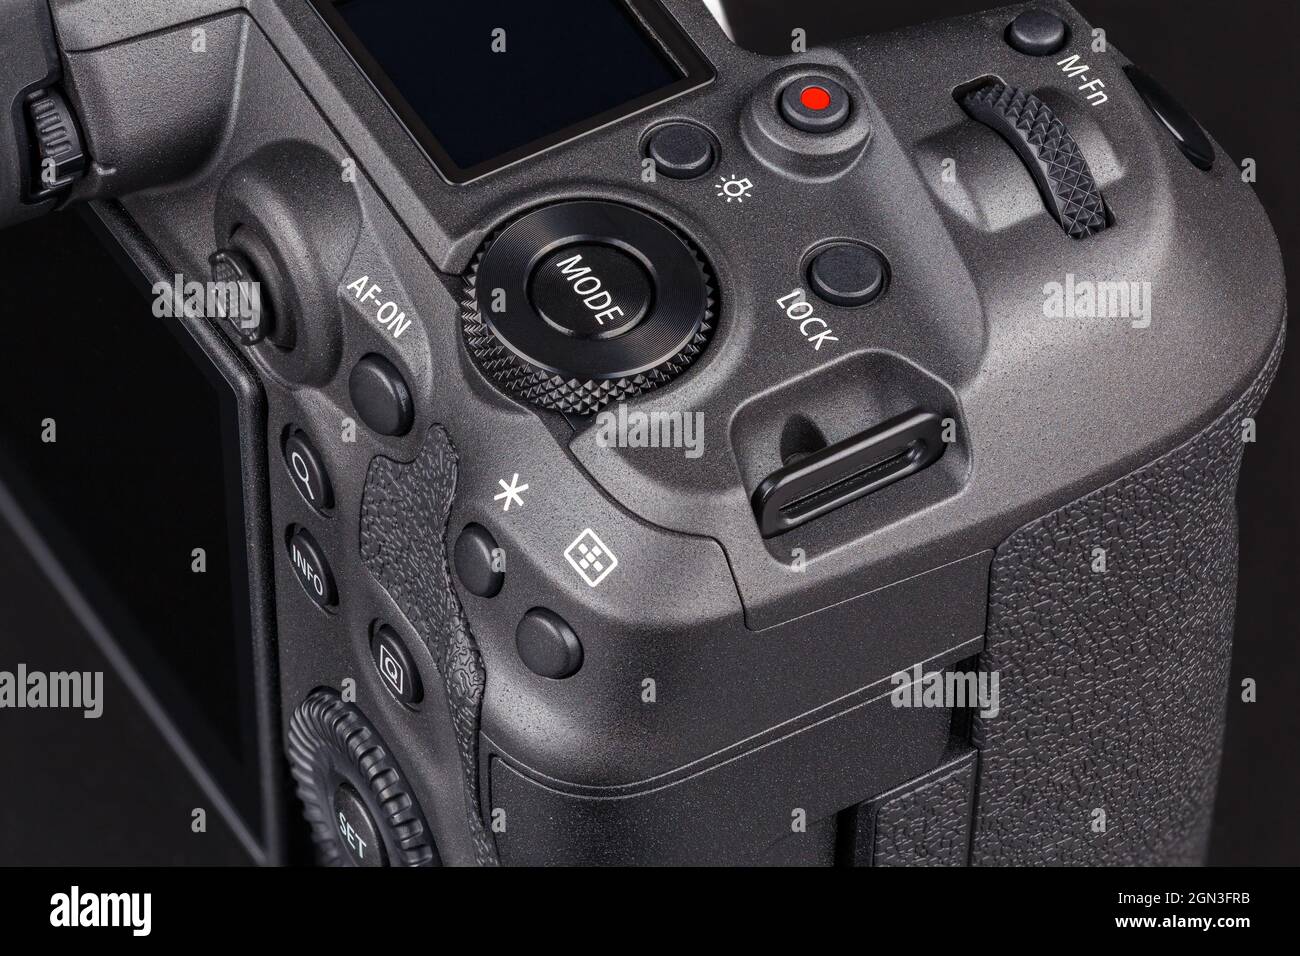 modern professional black digital photo camera controls - buttons, wheels, screens and joystick - close-up view Stock Photo